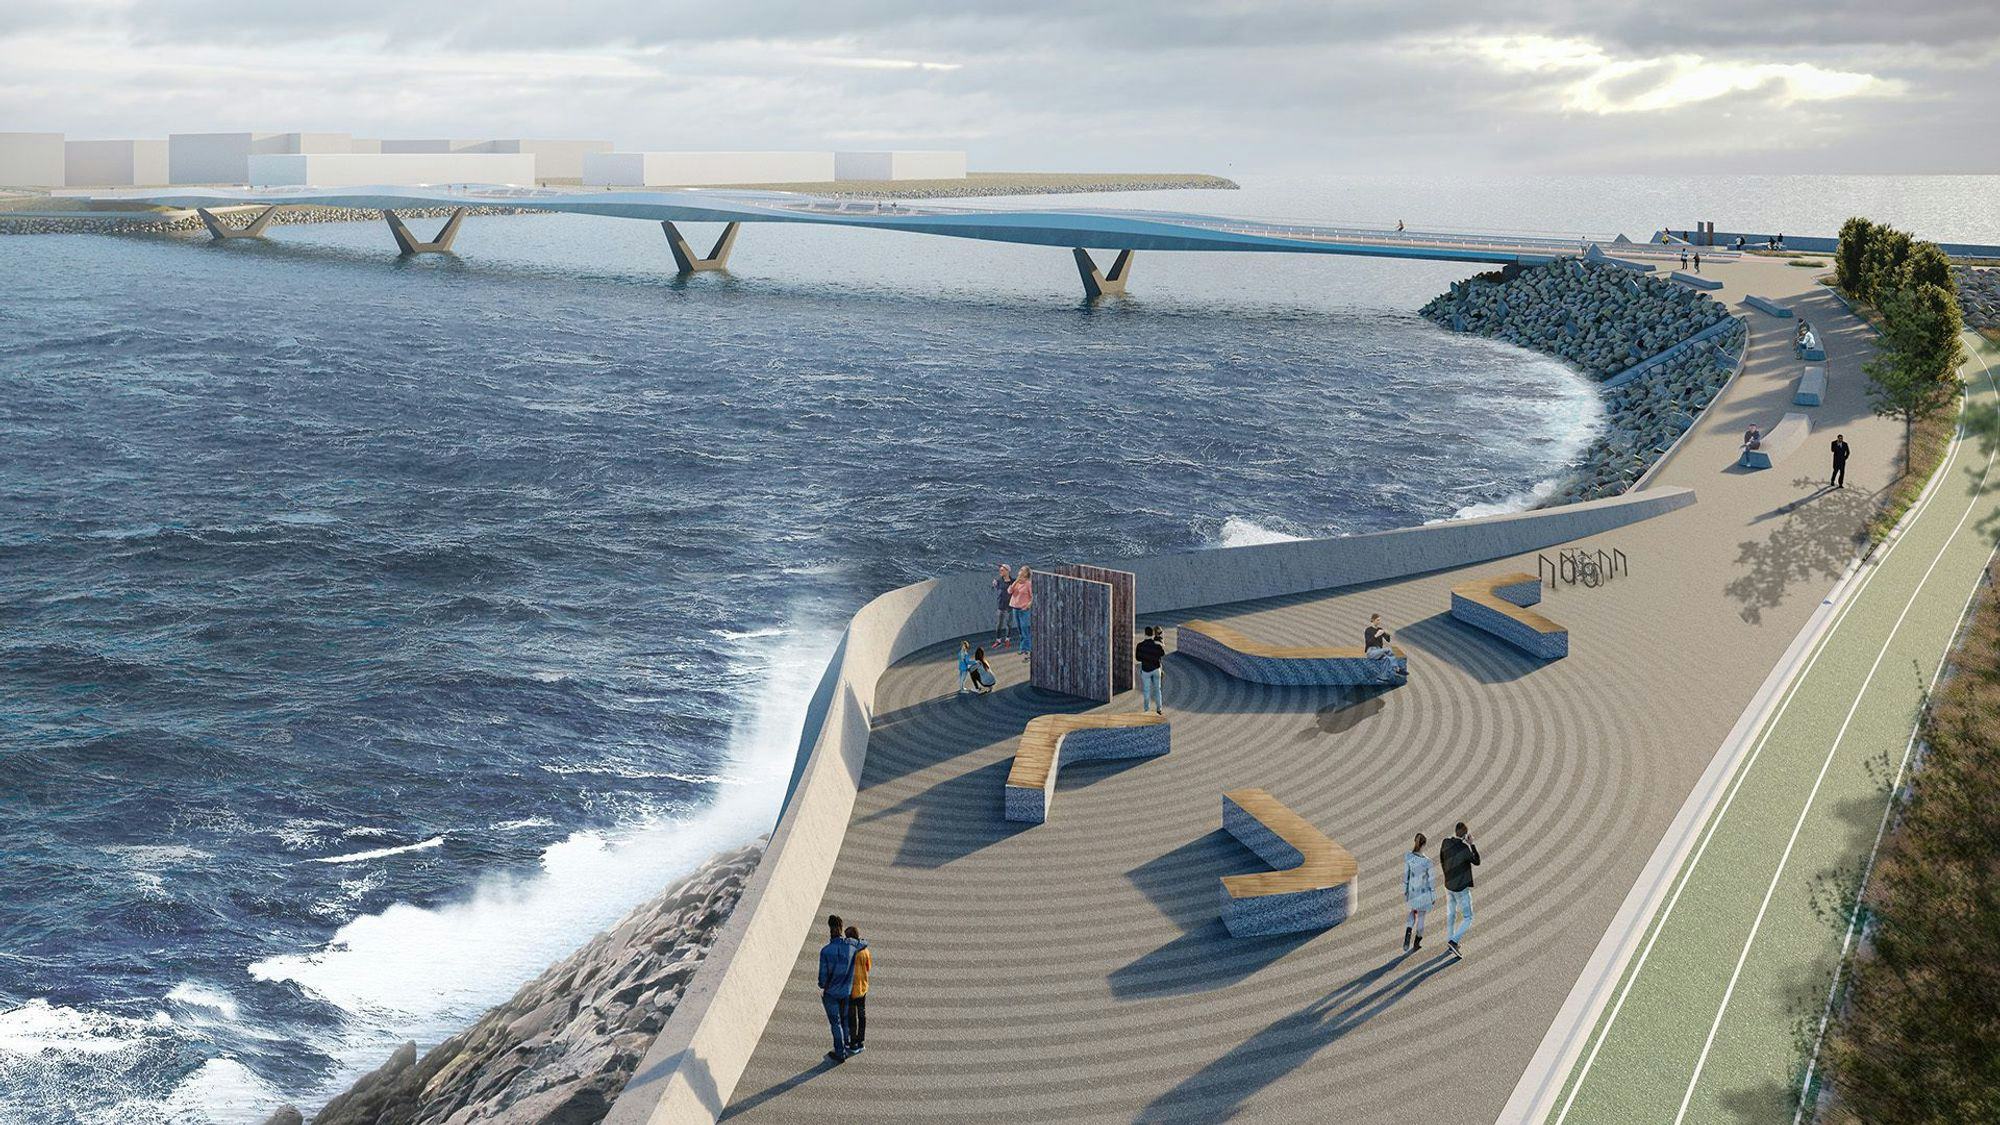 3D picture of coastal area with bridge in the background and people overlooking the sea